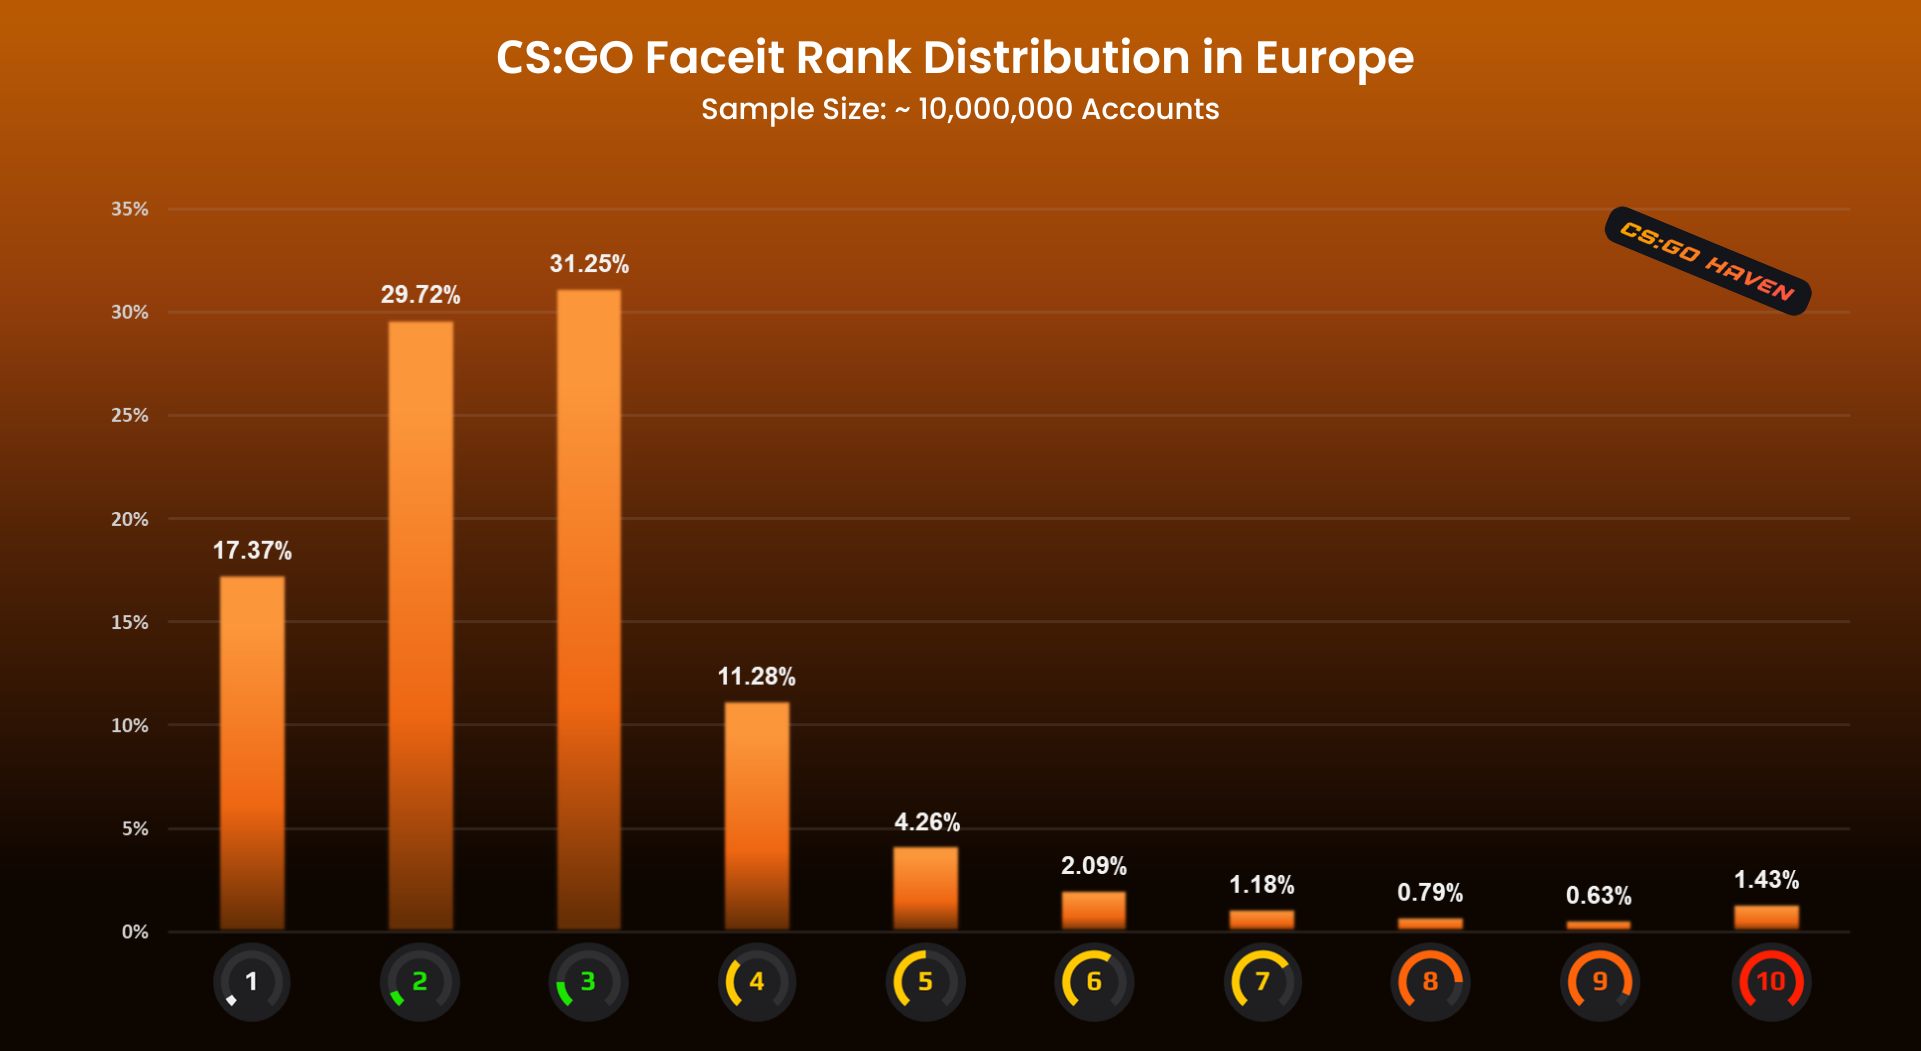 csgo-faceit-rank-distribution-in-europe.png